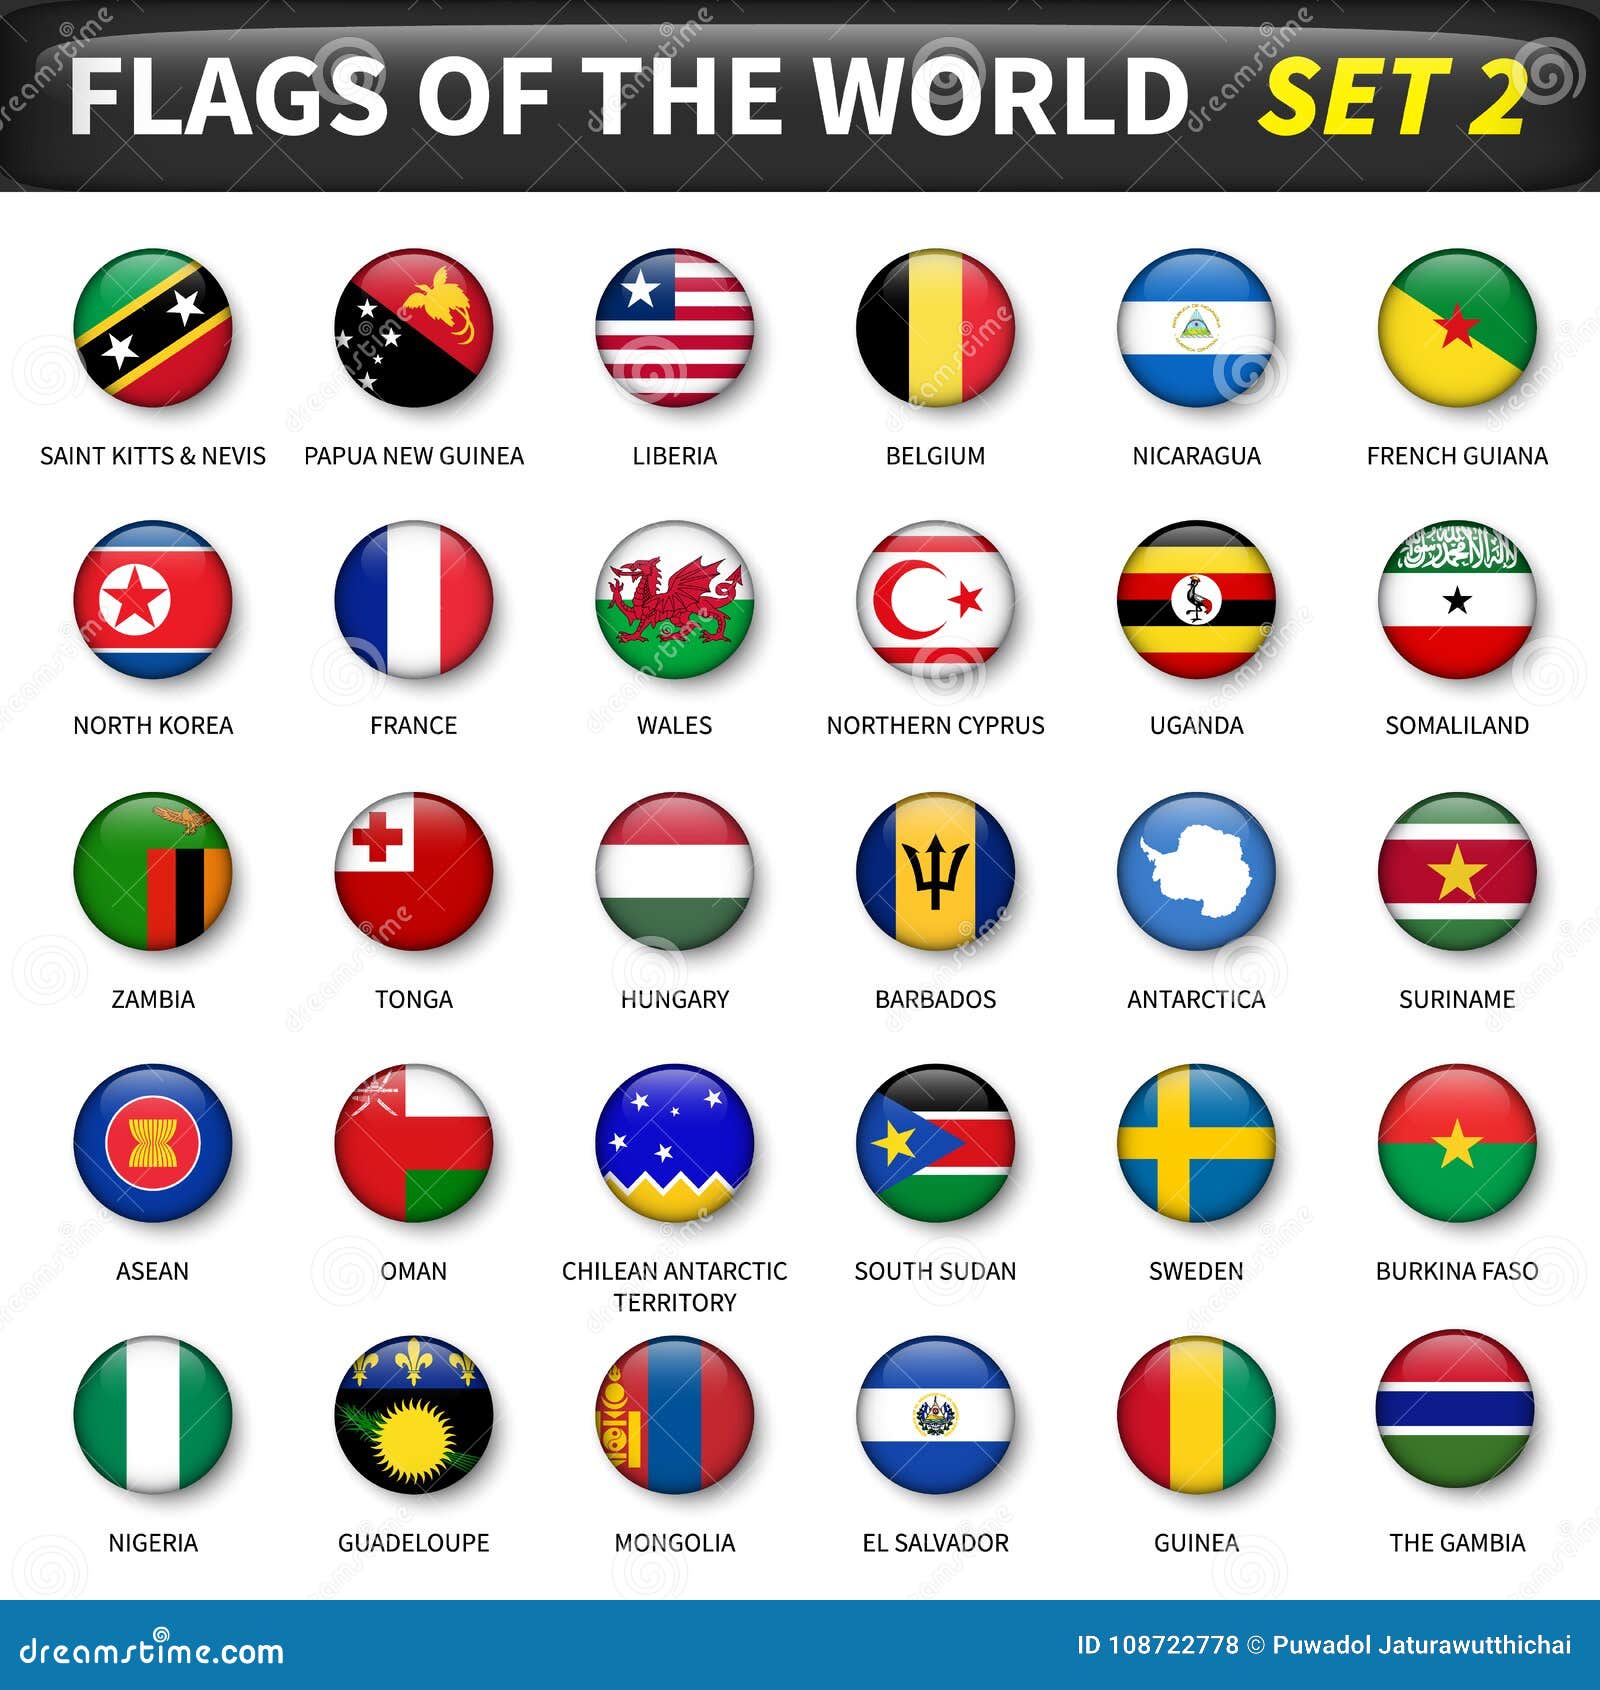 All Flags Of The World Set 2 Circle And Convex Design Vector